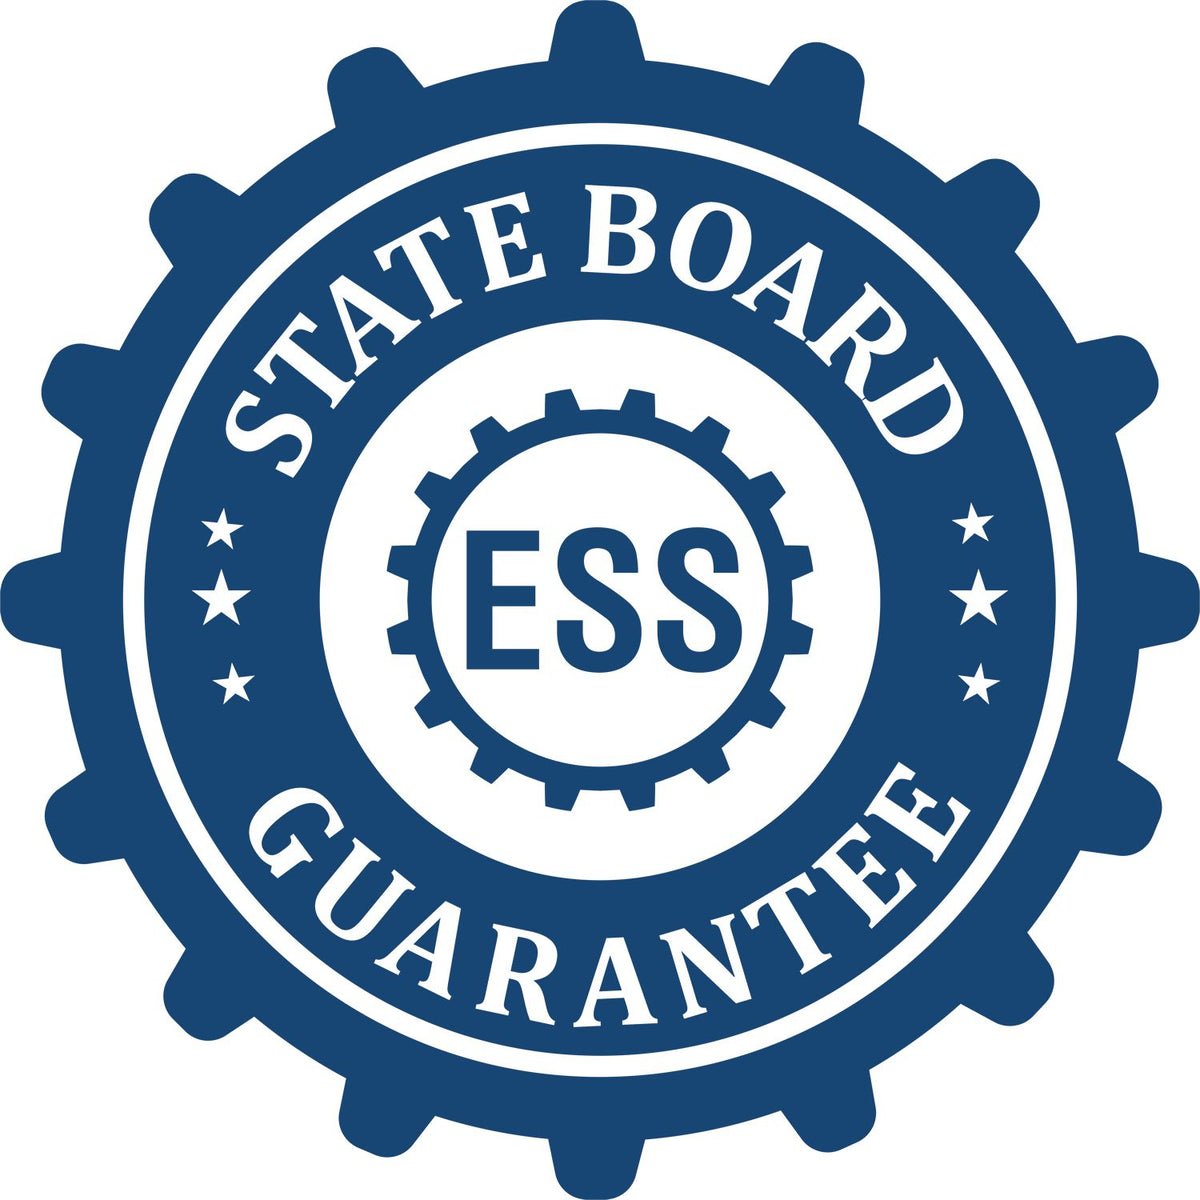 An emblem in a gear shape illustrating a state board guarantee for the Hybrid Illinois Engineer Seal